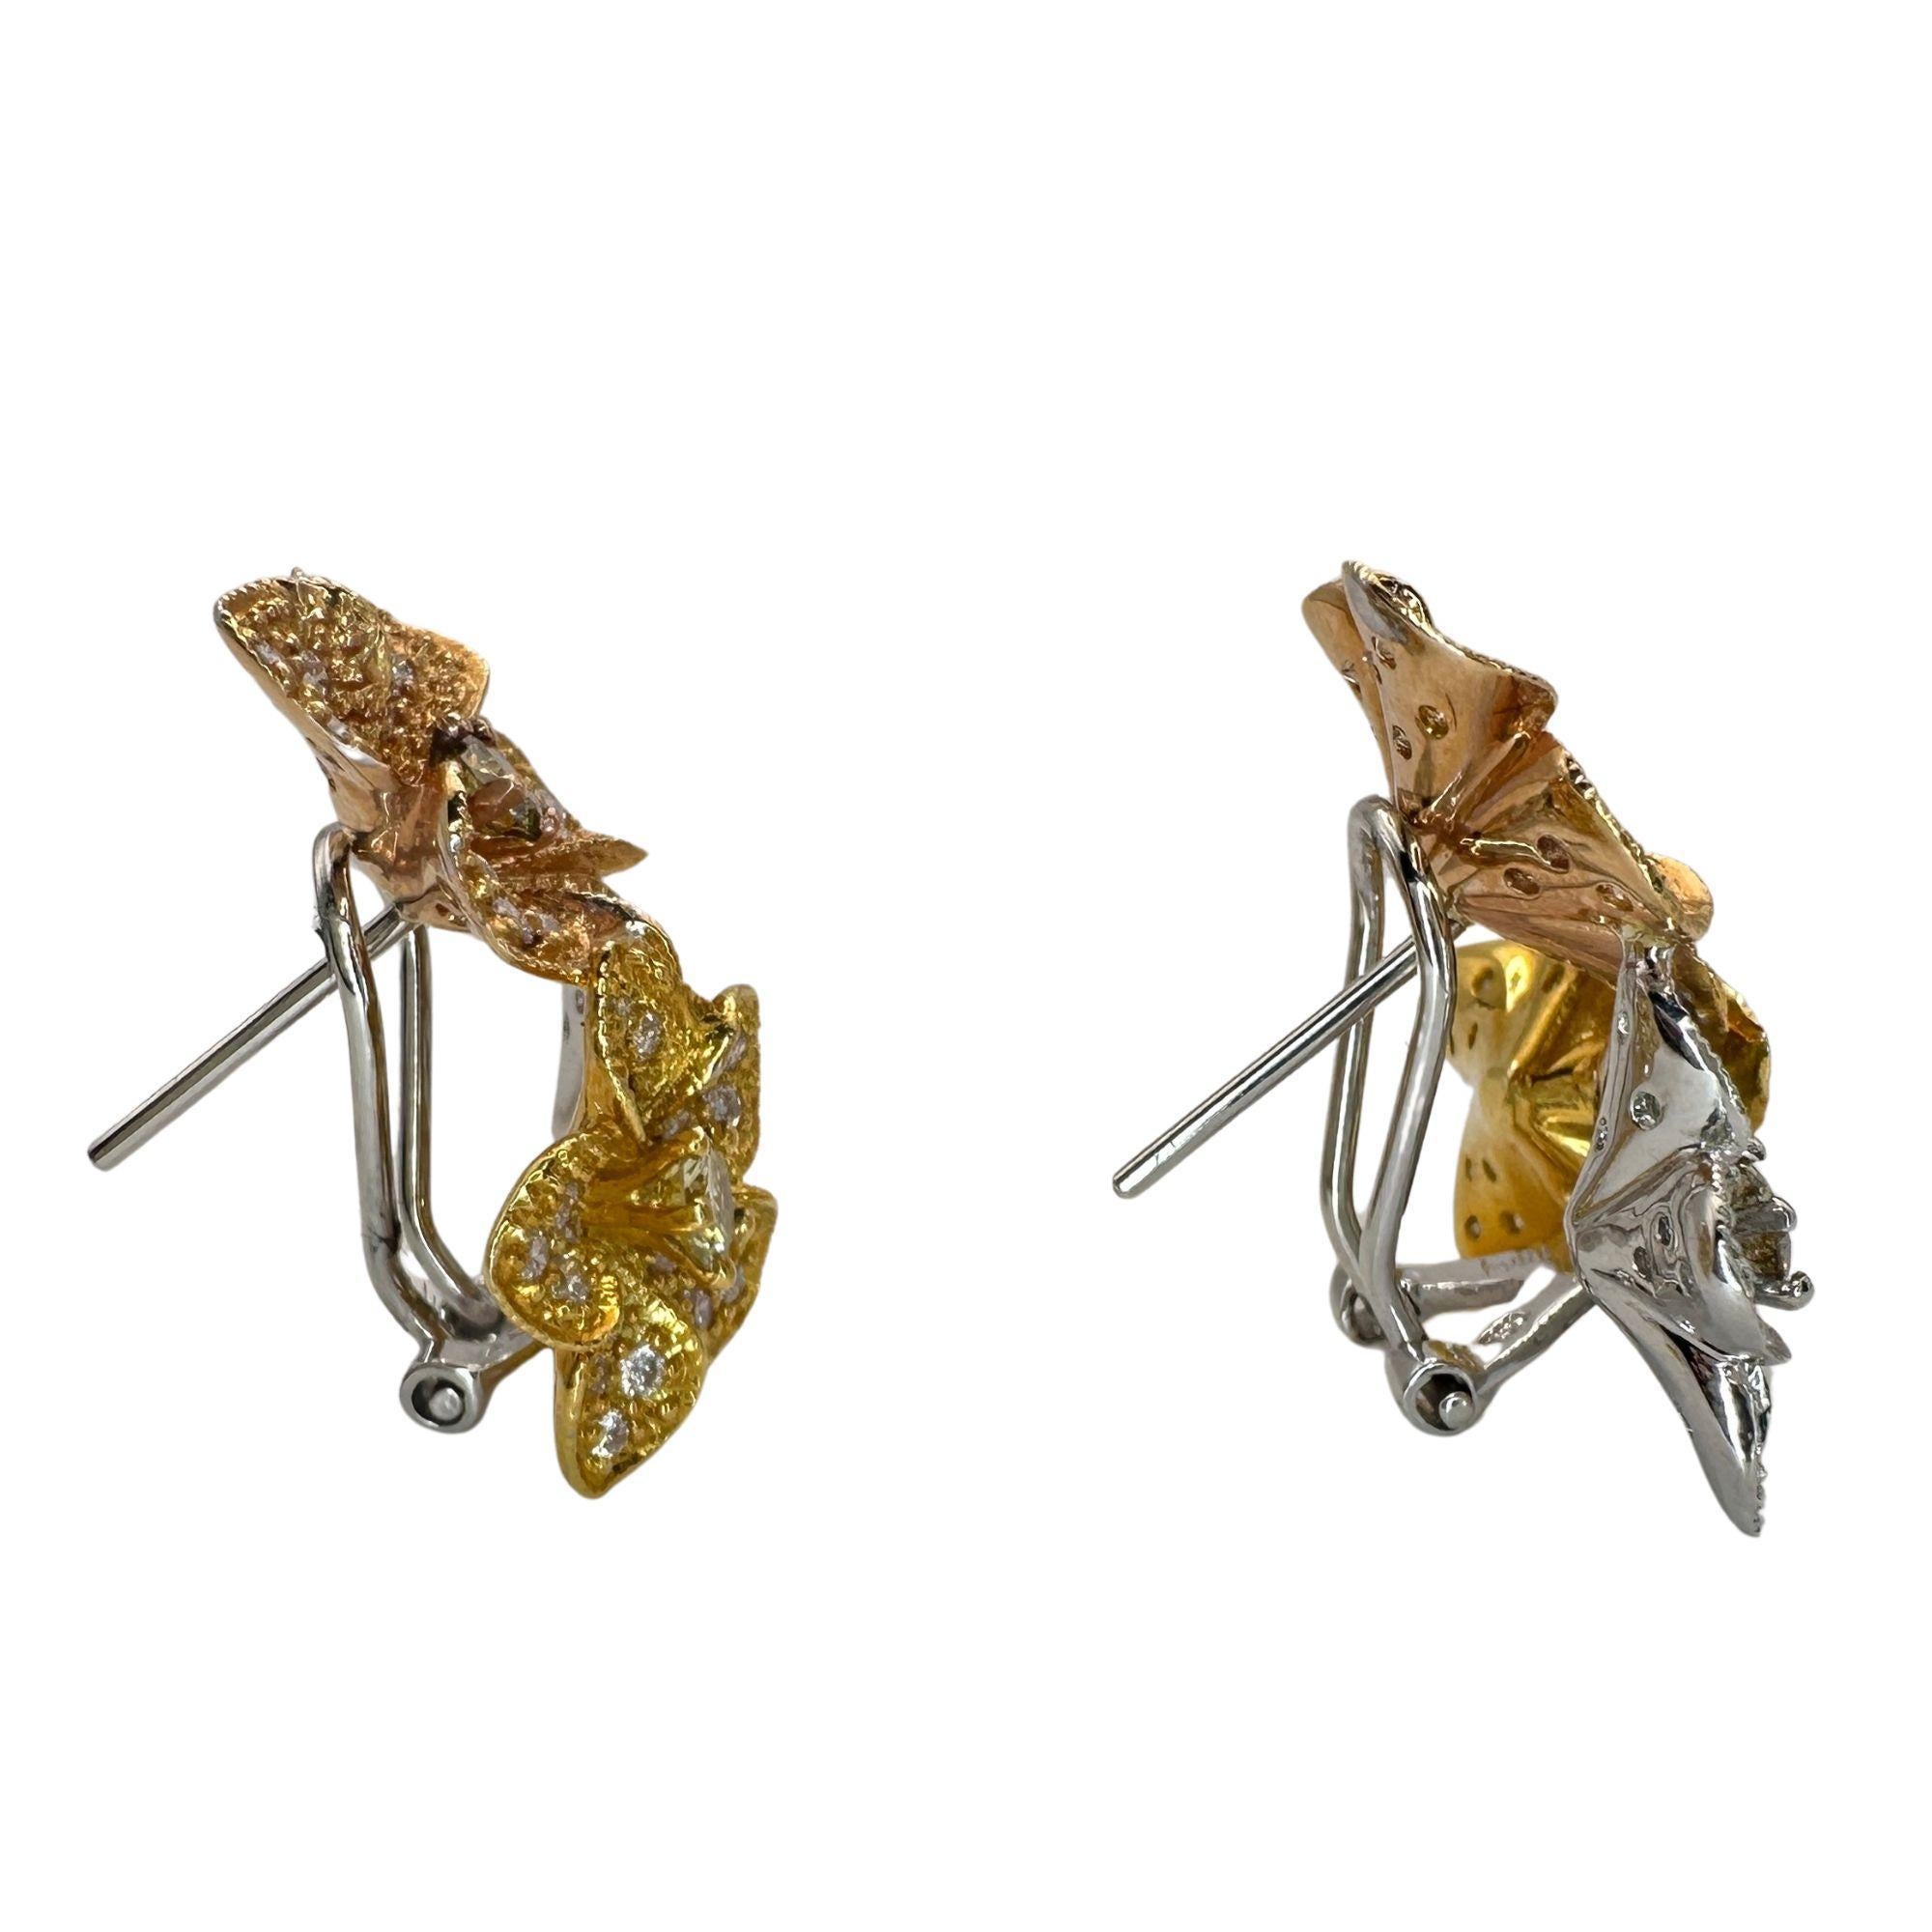 These stunning 18k Diamond Floral Earrings feature a total of 2.19 carats of sparkling diamonds, including a 0.90 carat yellow diamond and 1.29 carats of white diamonds. Crafted in 18k white, yellow and rose gold, these earrings are in excellent